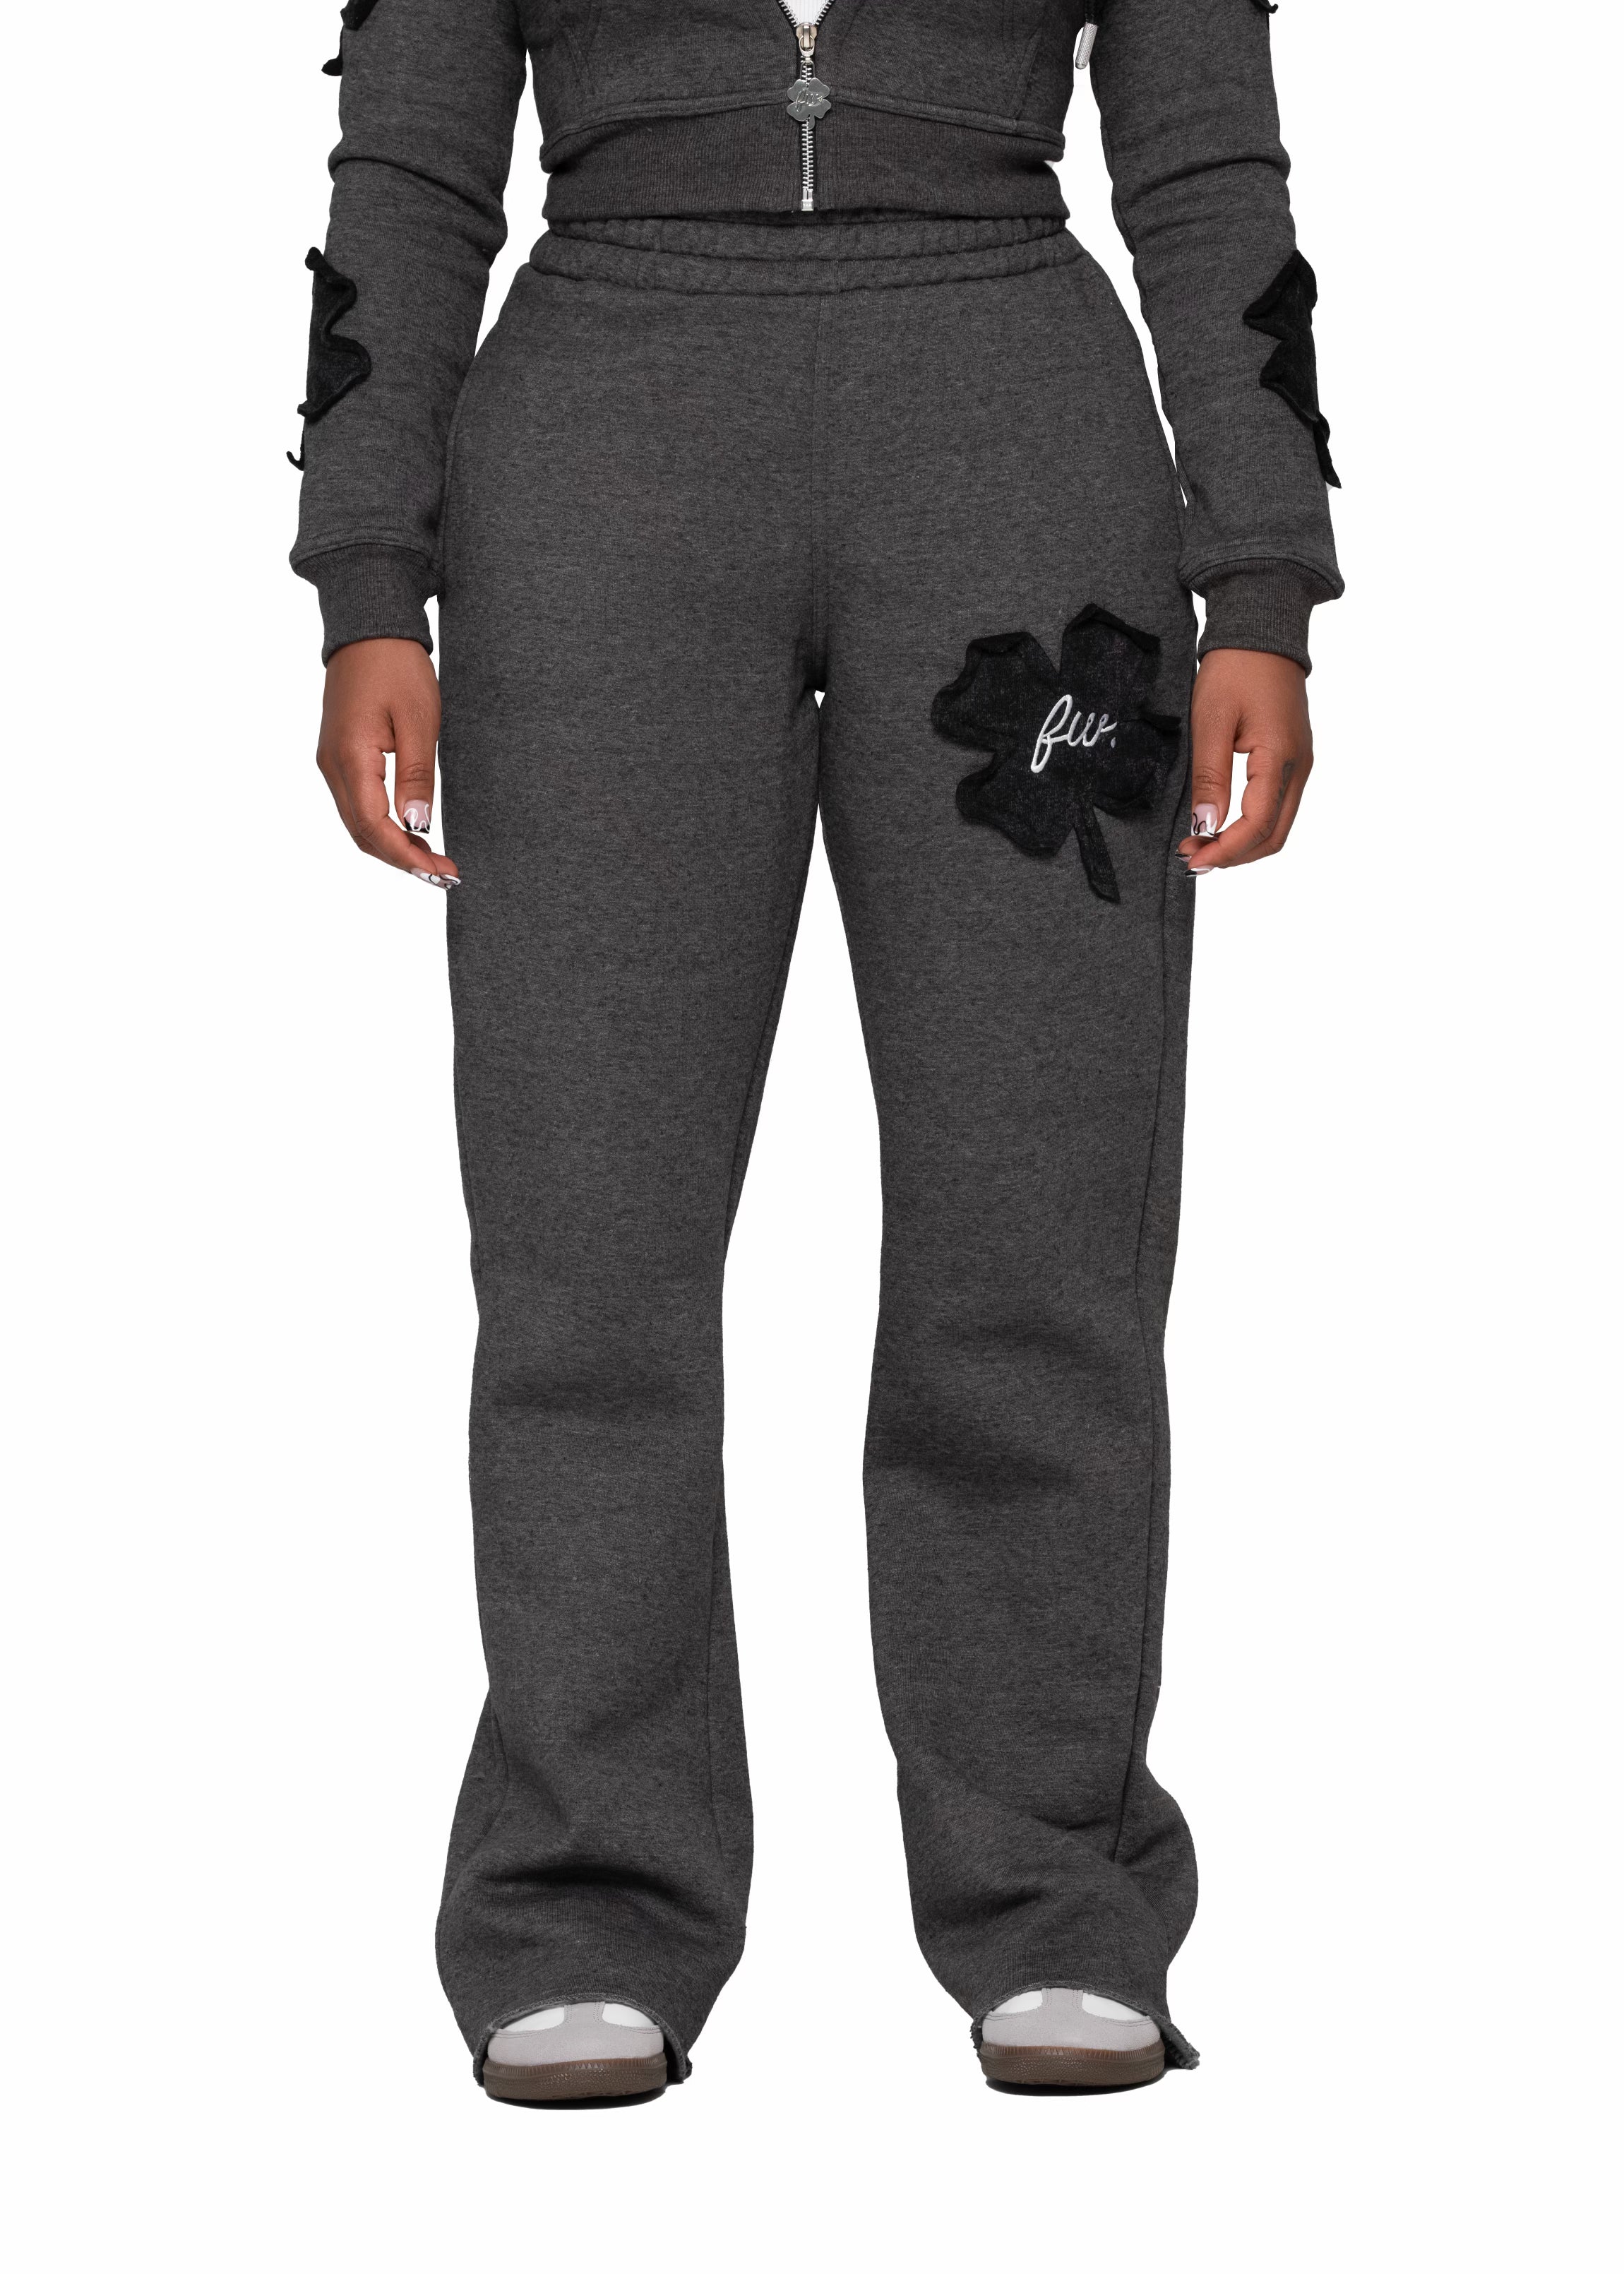 Stitched Clover Flare Sweatpants